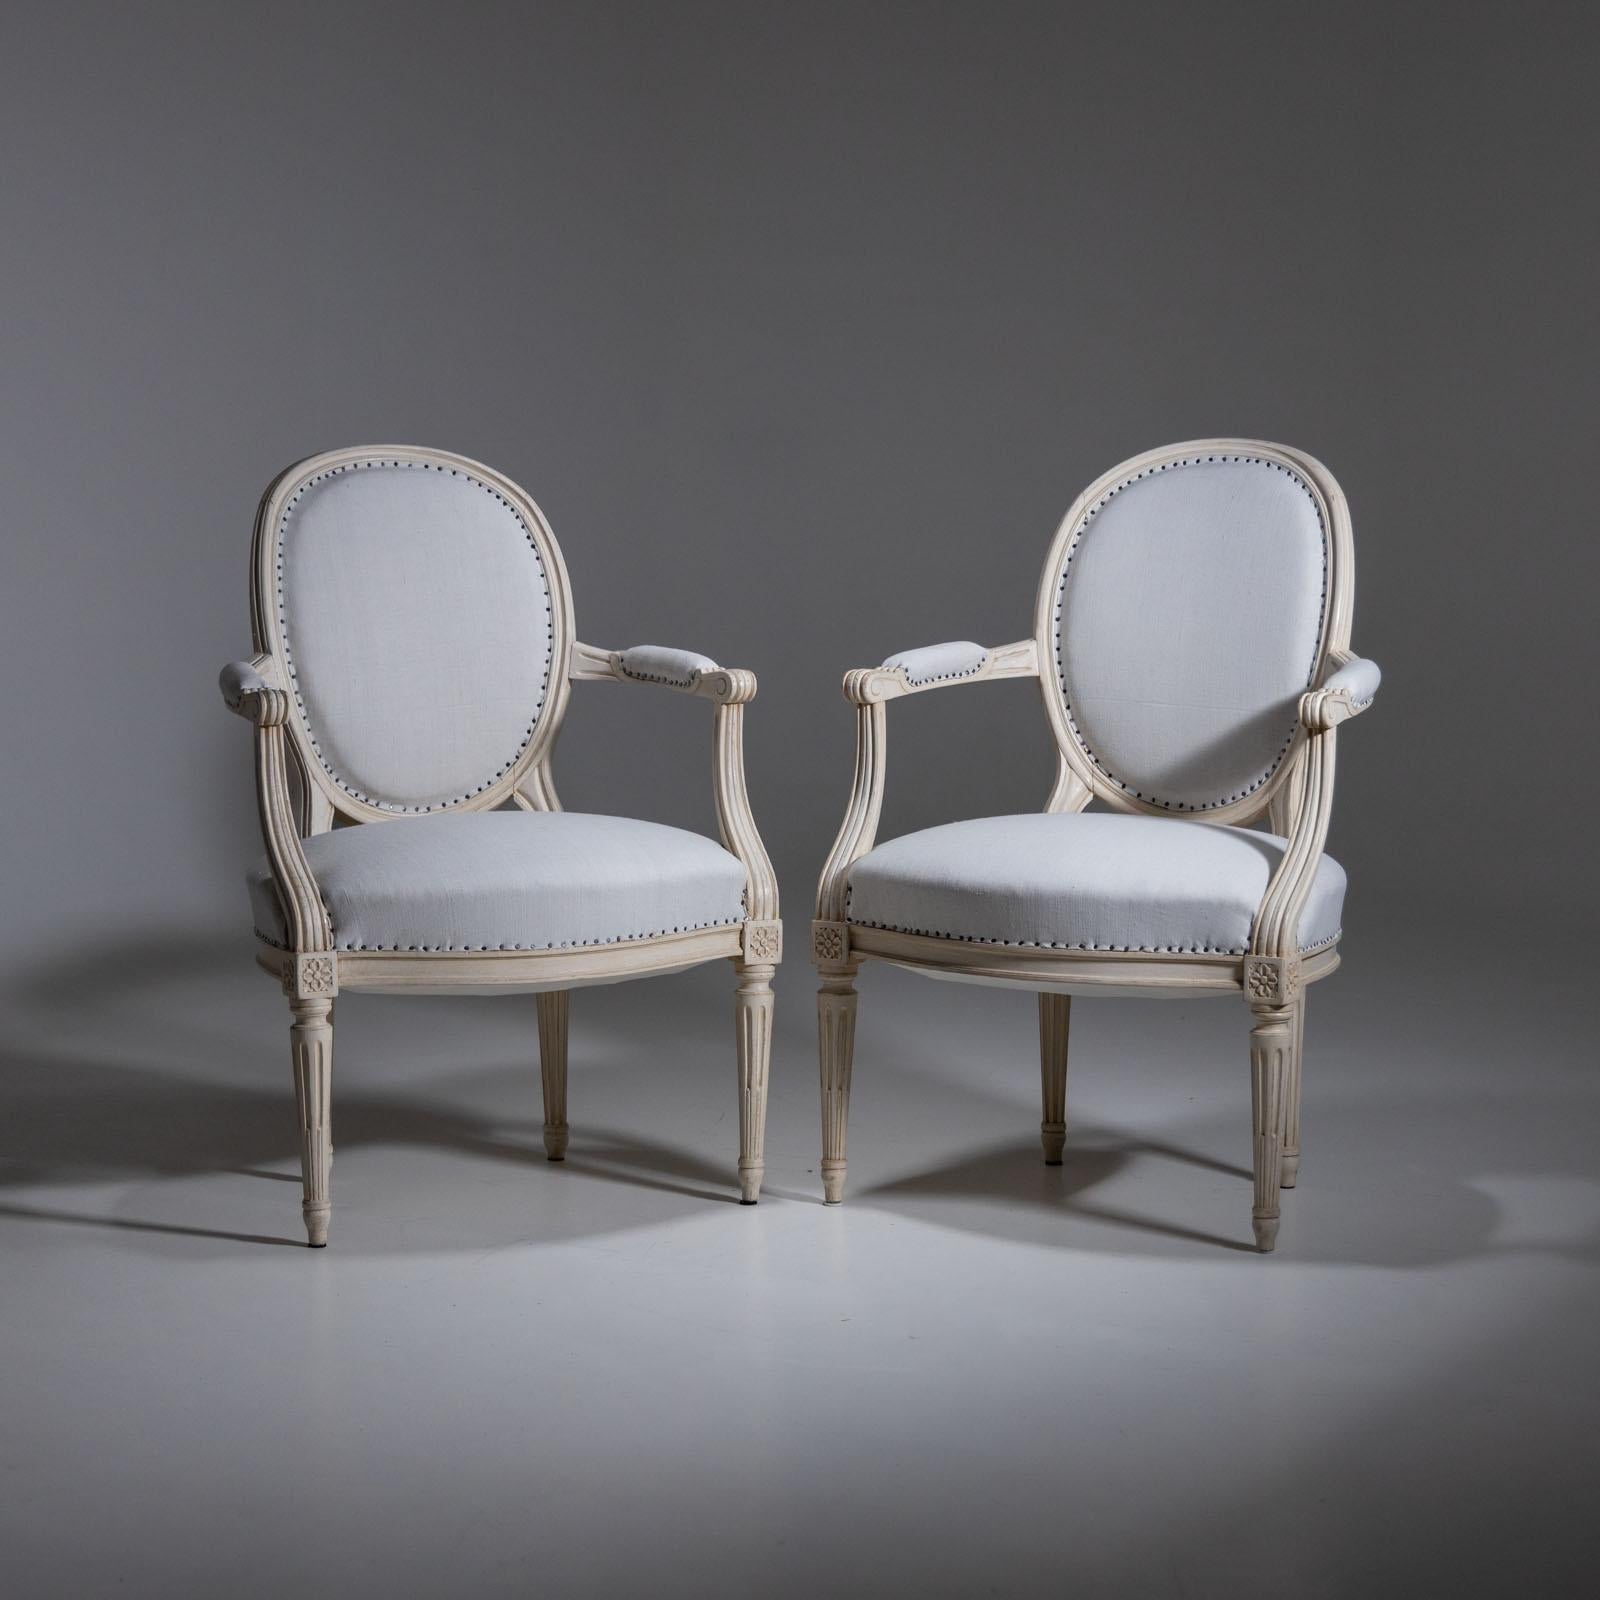 Pair of chairs with medallion-shaped upholstered backrests and upholstered armrests and seats. The beige paintwork is new and has a light antique patina. The chairs have been covered with an antique white linen fabric with studded decoration.